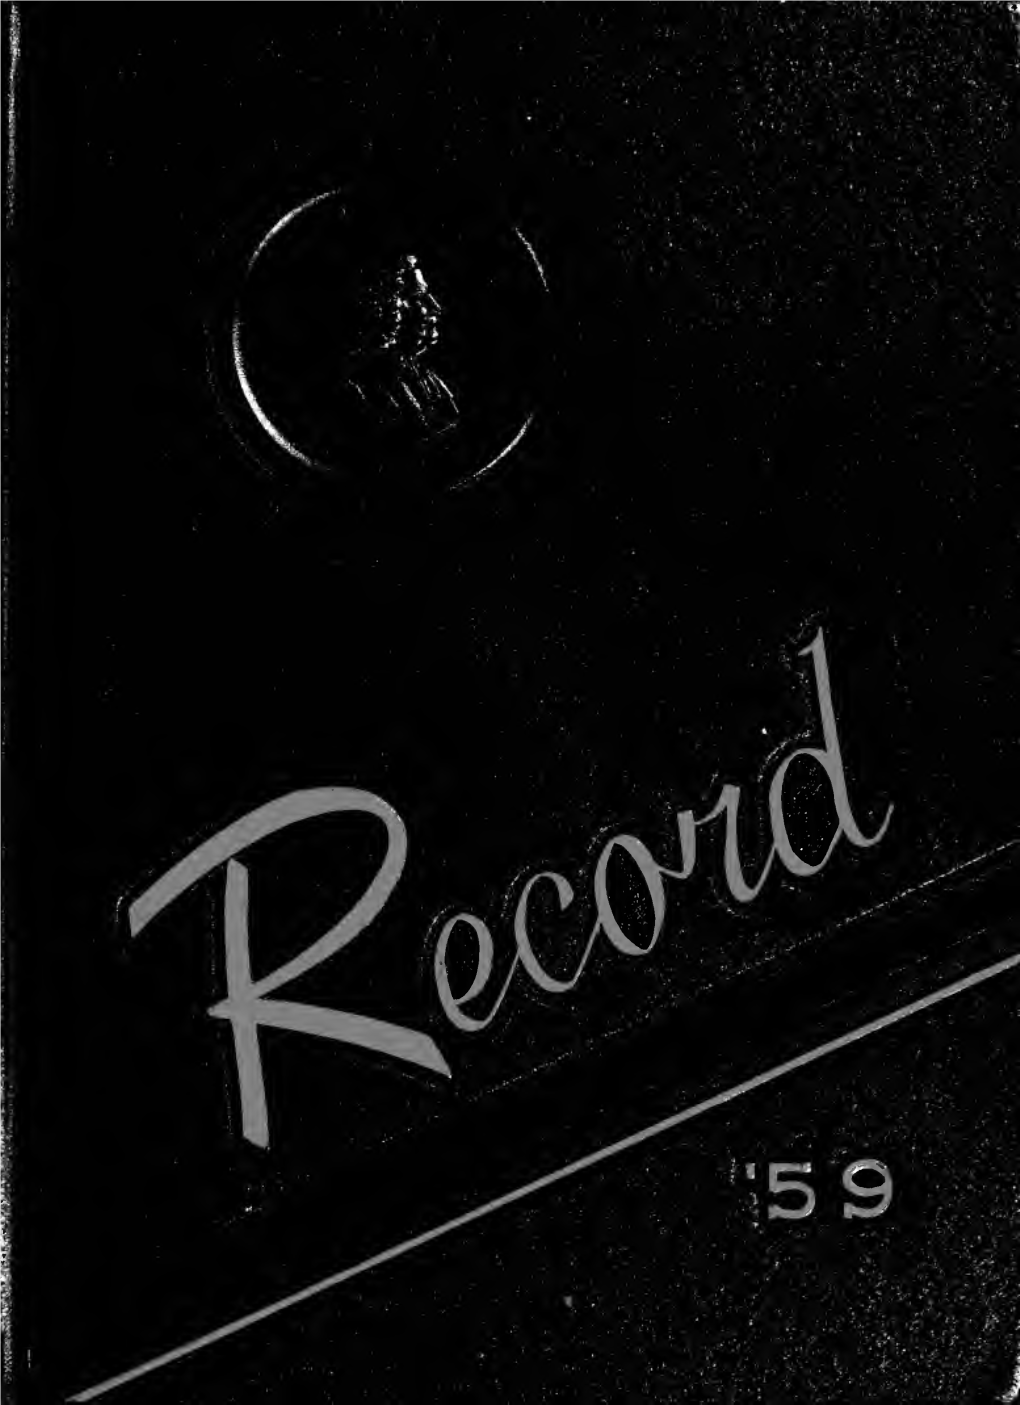 1959 Season from 1960 the Record